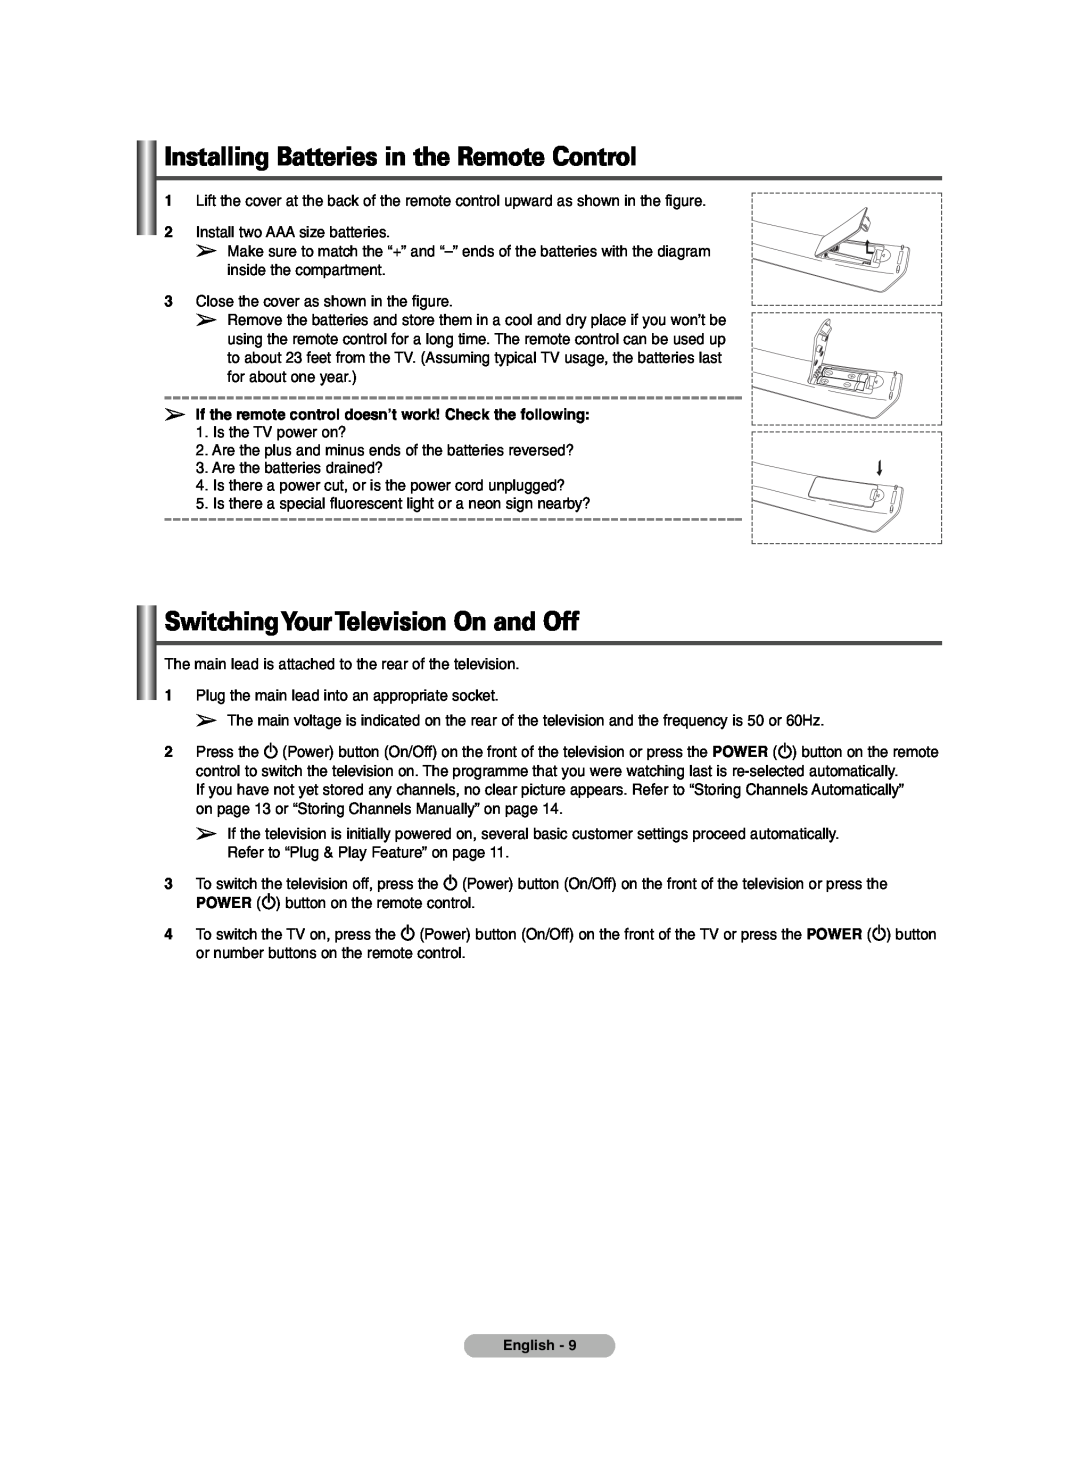 Samsung PDP-TELEVISION manual Installing Batteries in the Remote Control, SwitchingYourTelevision On and Off 